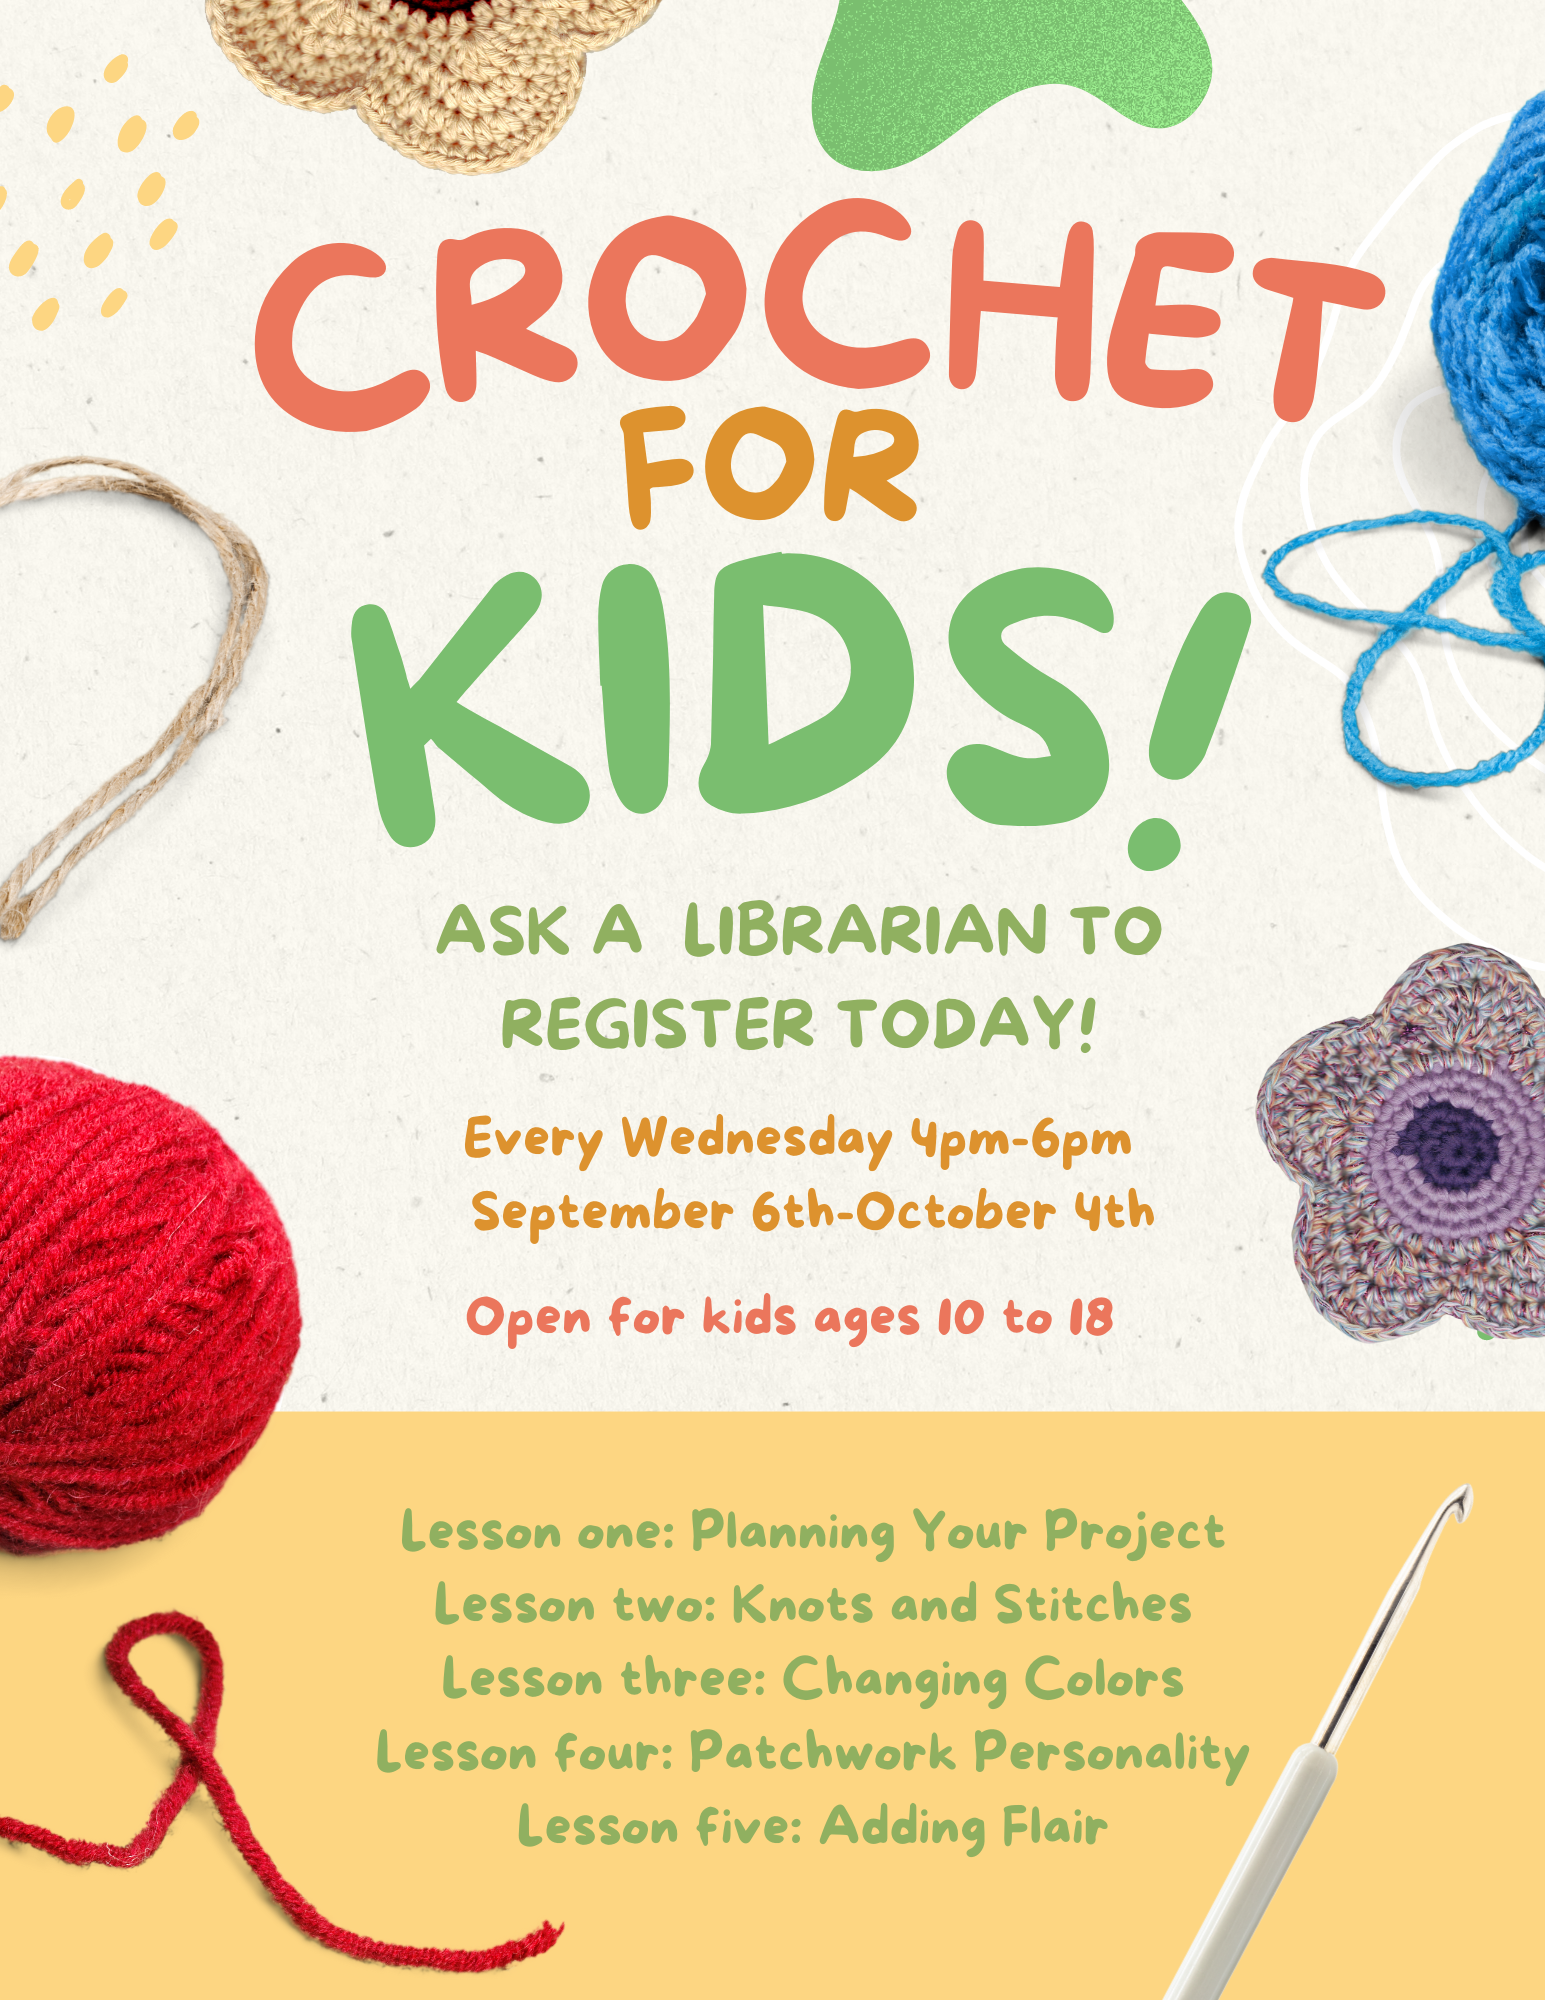 A flyer that reads, "Crochet for kids! Open for kids ages 10-18 every Wednesday 4pm-6pm  September 6th-October 4th. Lesson one: Planning Your Project Lesson two: Knots and Stitches Lesson three: Changing Colors Lesson four: Patchwork Personality Lesson five: Adding Flair." 